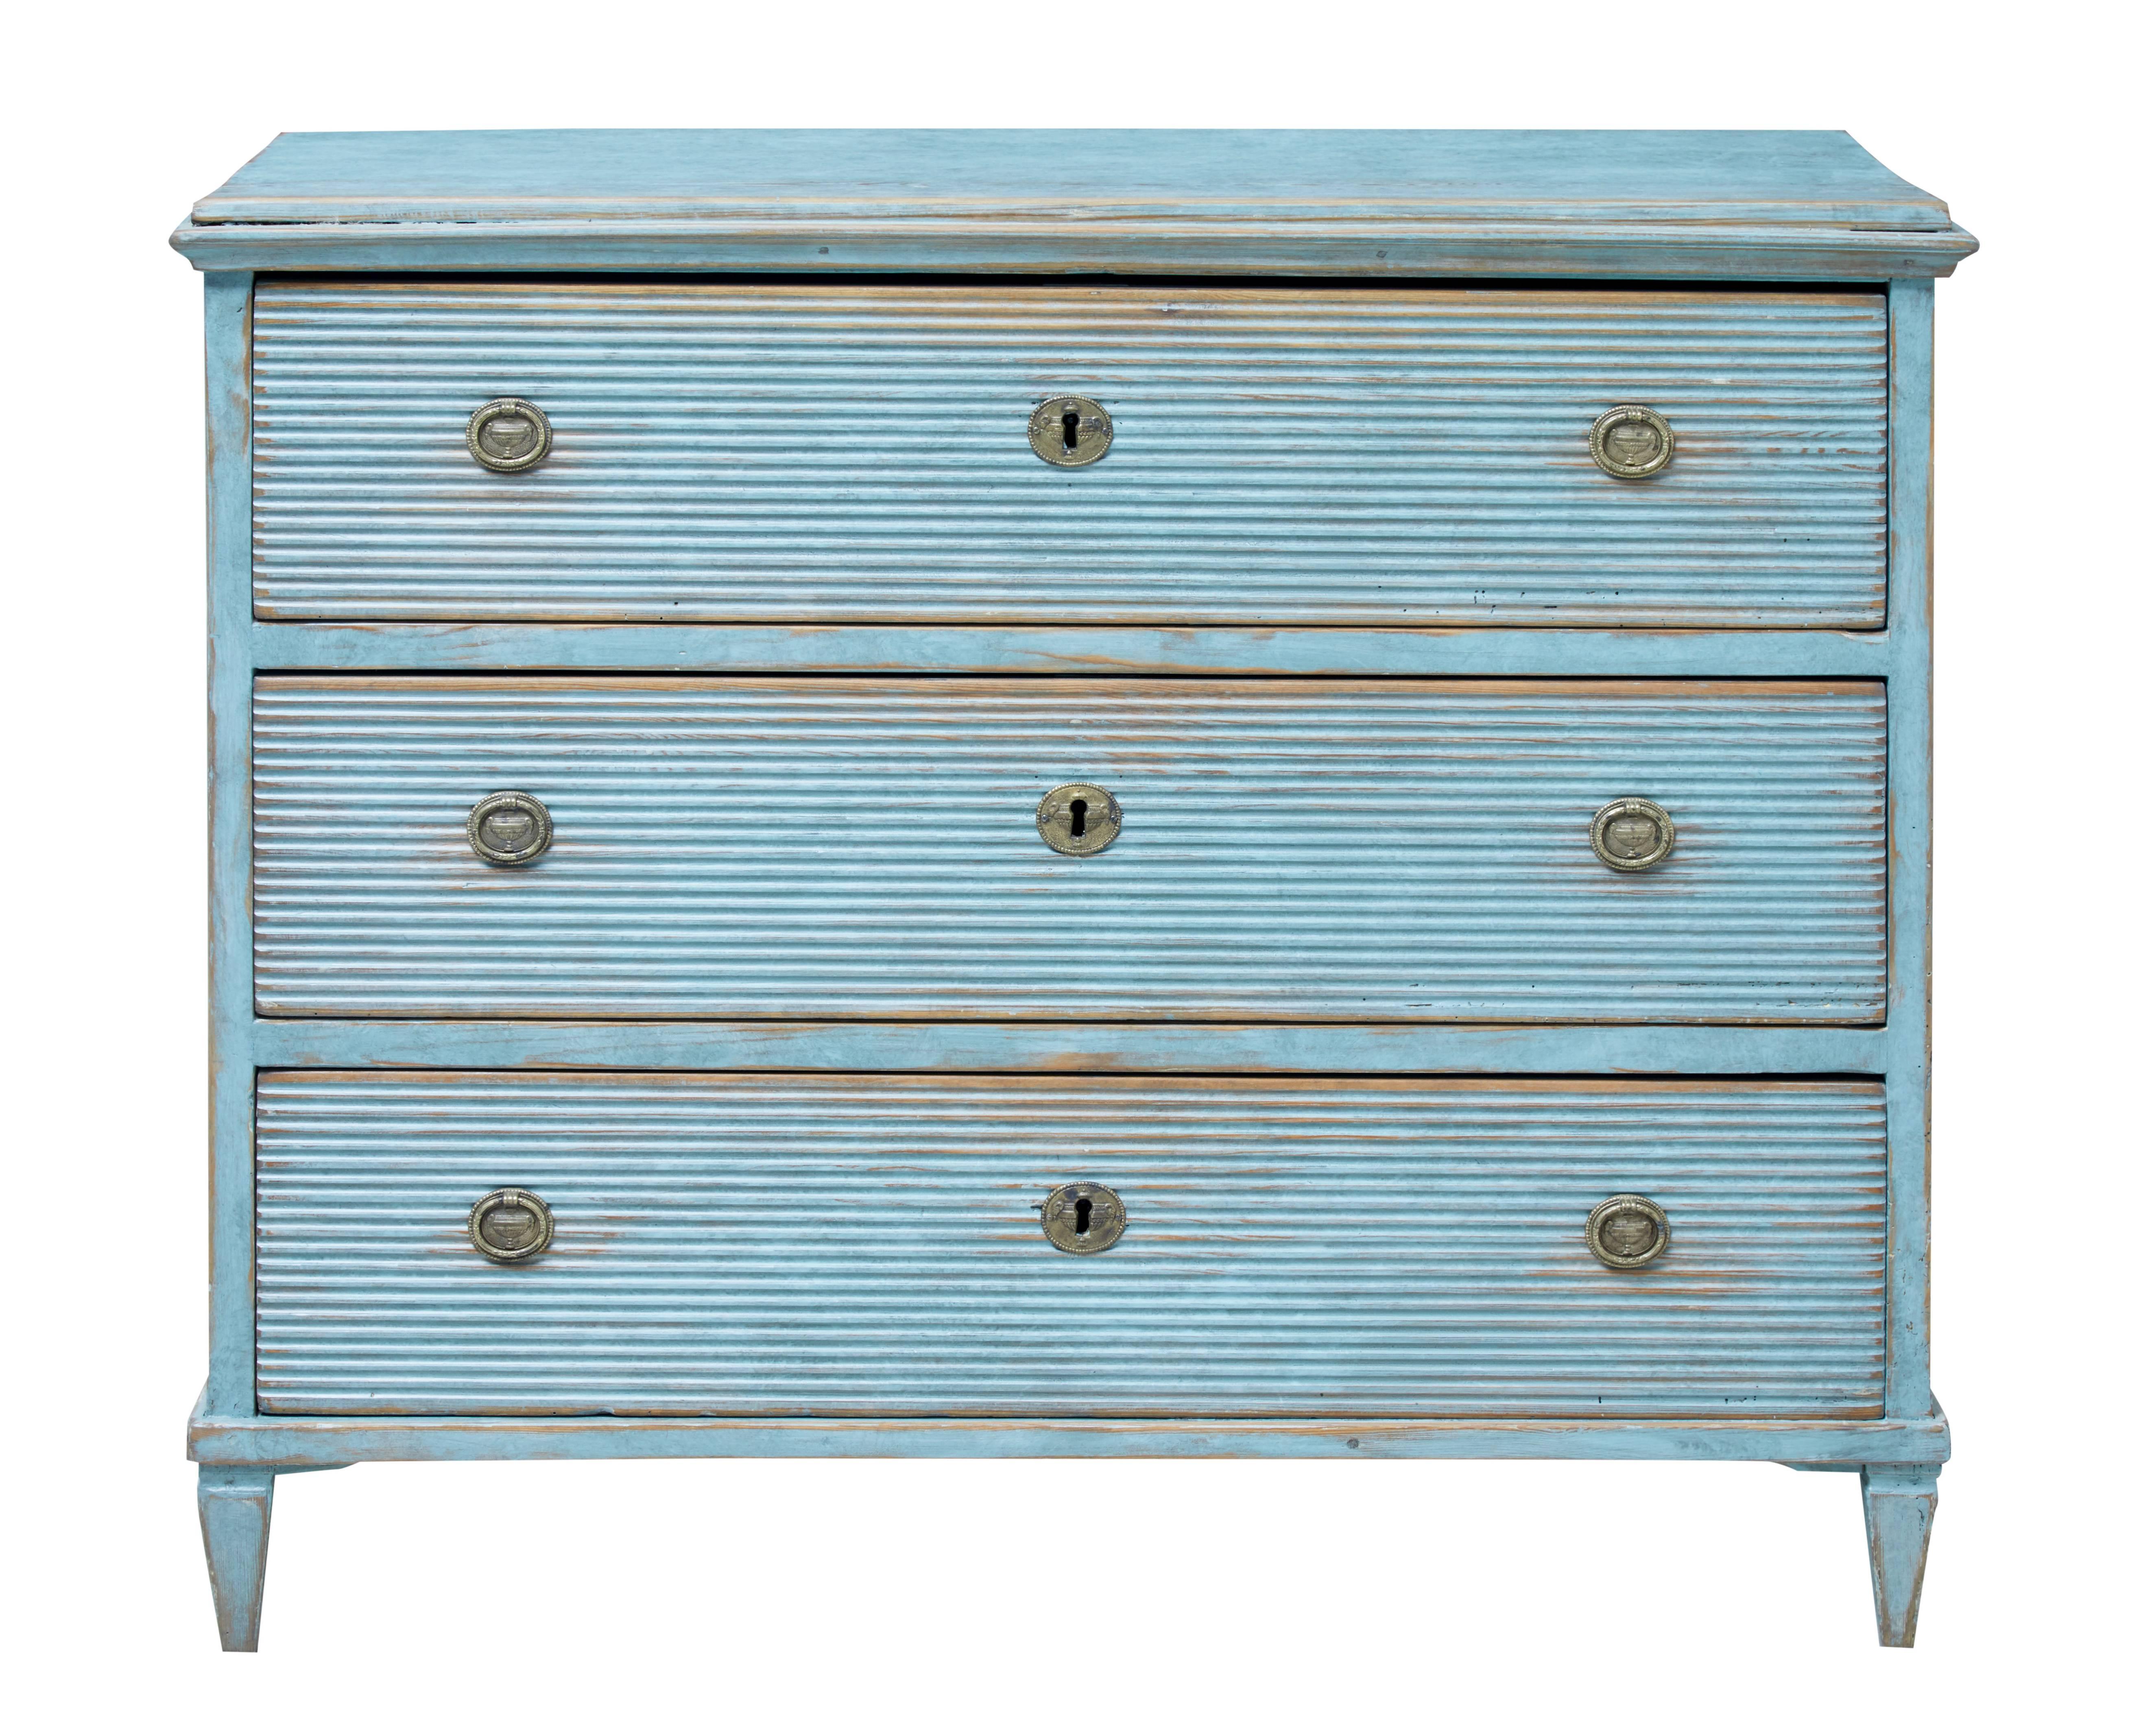 Good quality Swedish painted chest of drawers, circa 1860.

Three drawers all with channeled drawer fronts, loop handles and escutheons.

Standing on tapered legs.

Later paint which has now taken on a distressed finish.